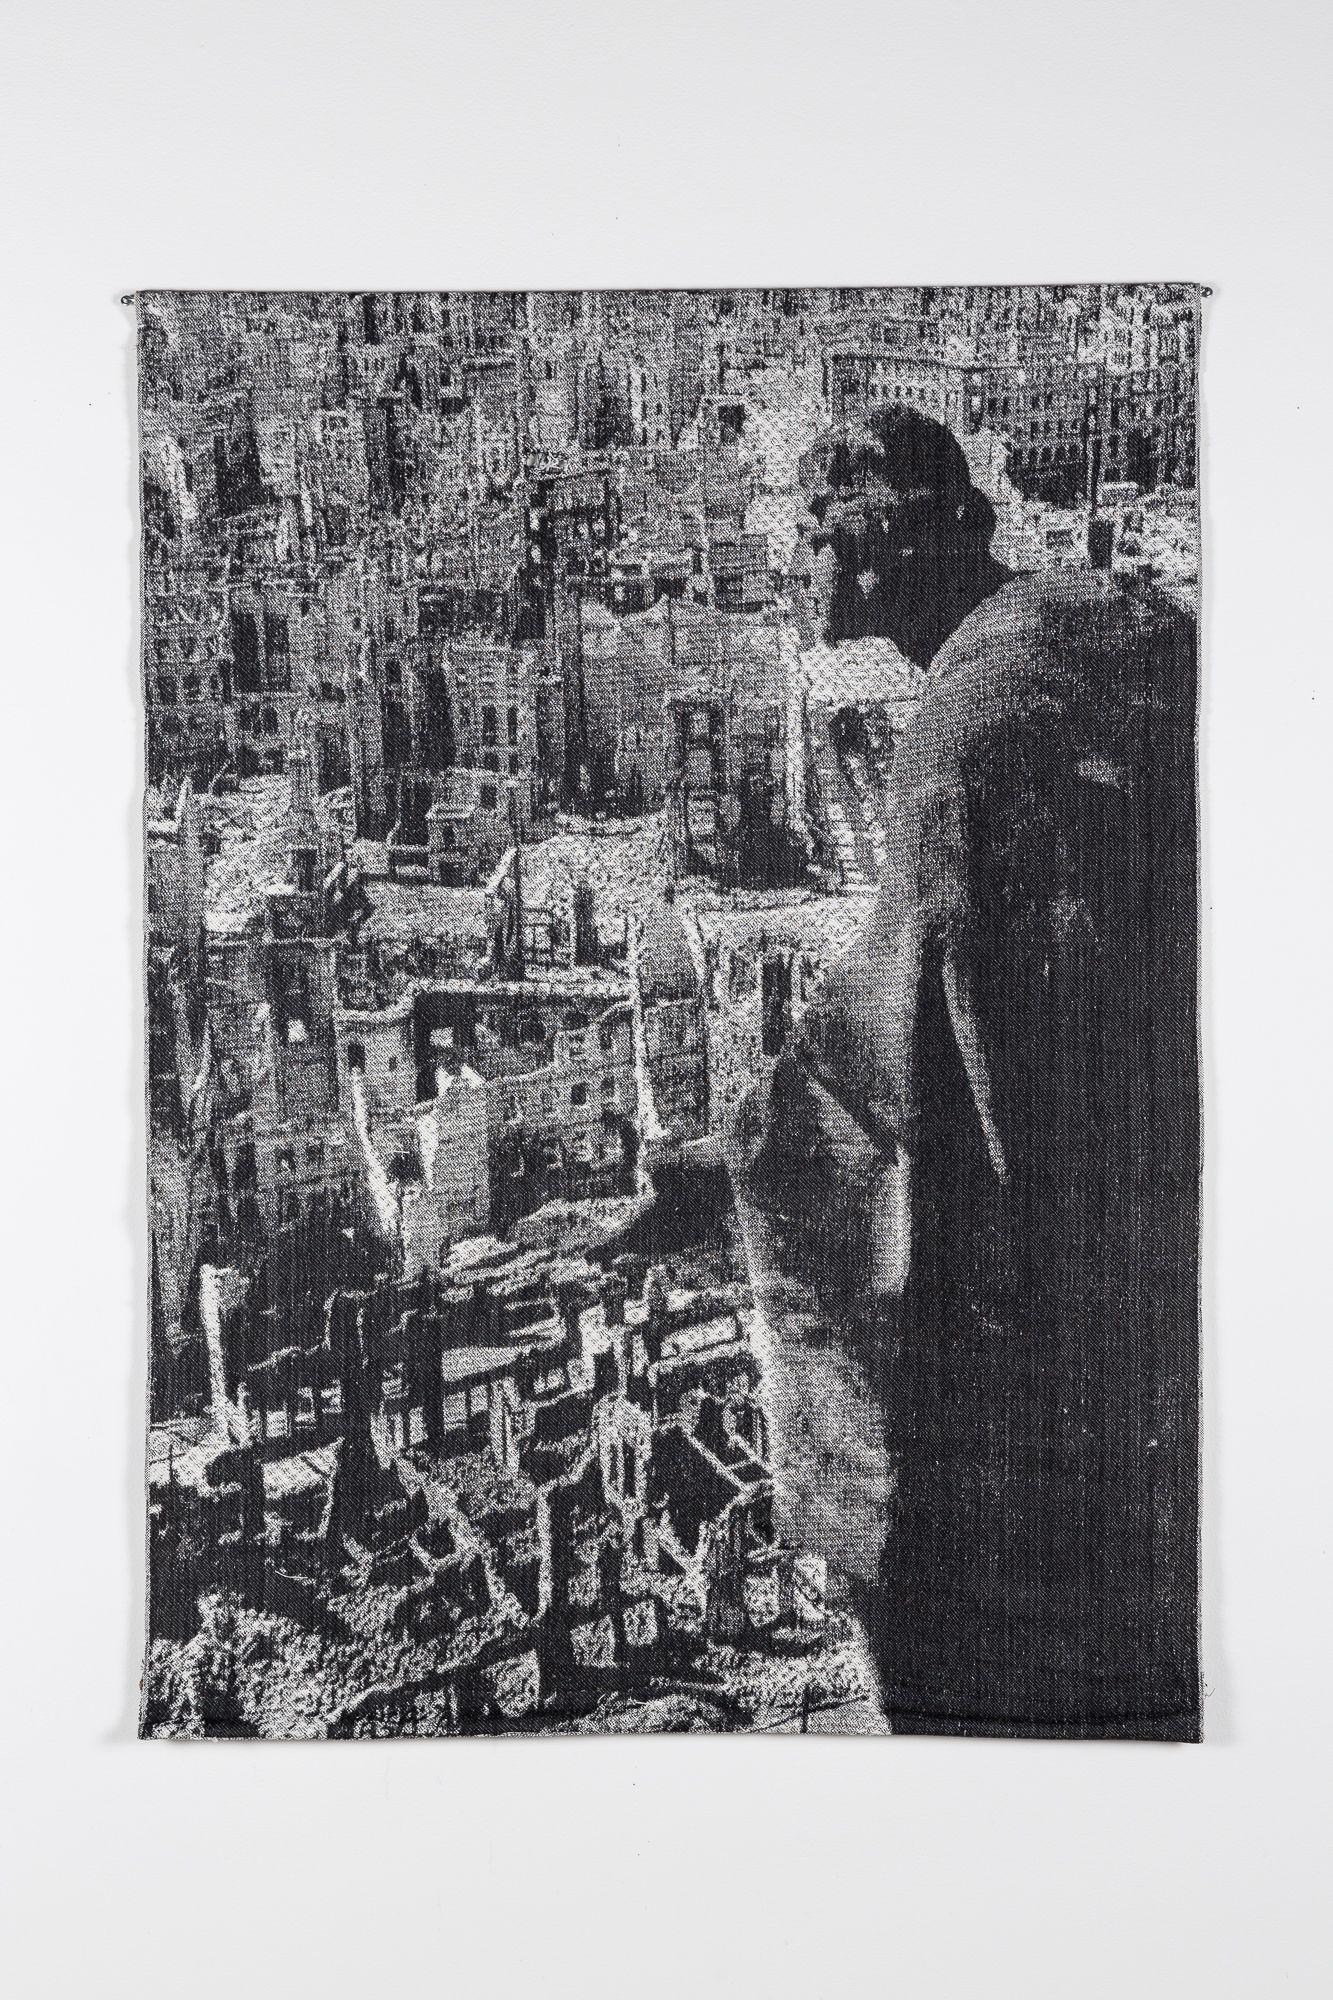 Digitally-woven tapestry depicting a view of the bombing of Dresden